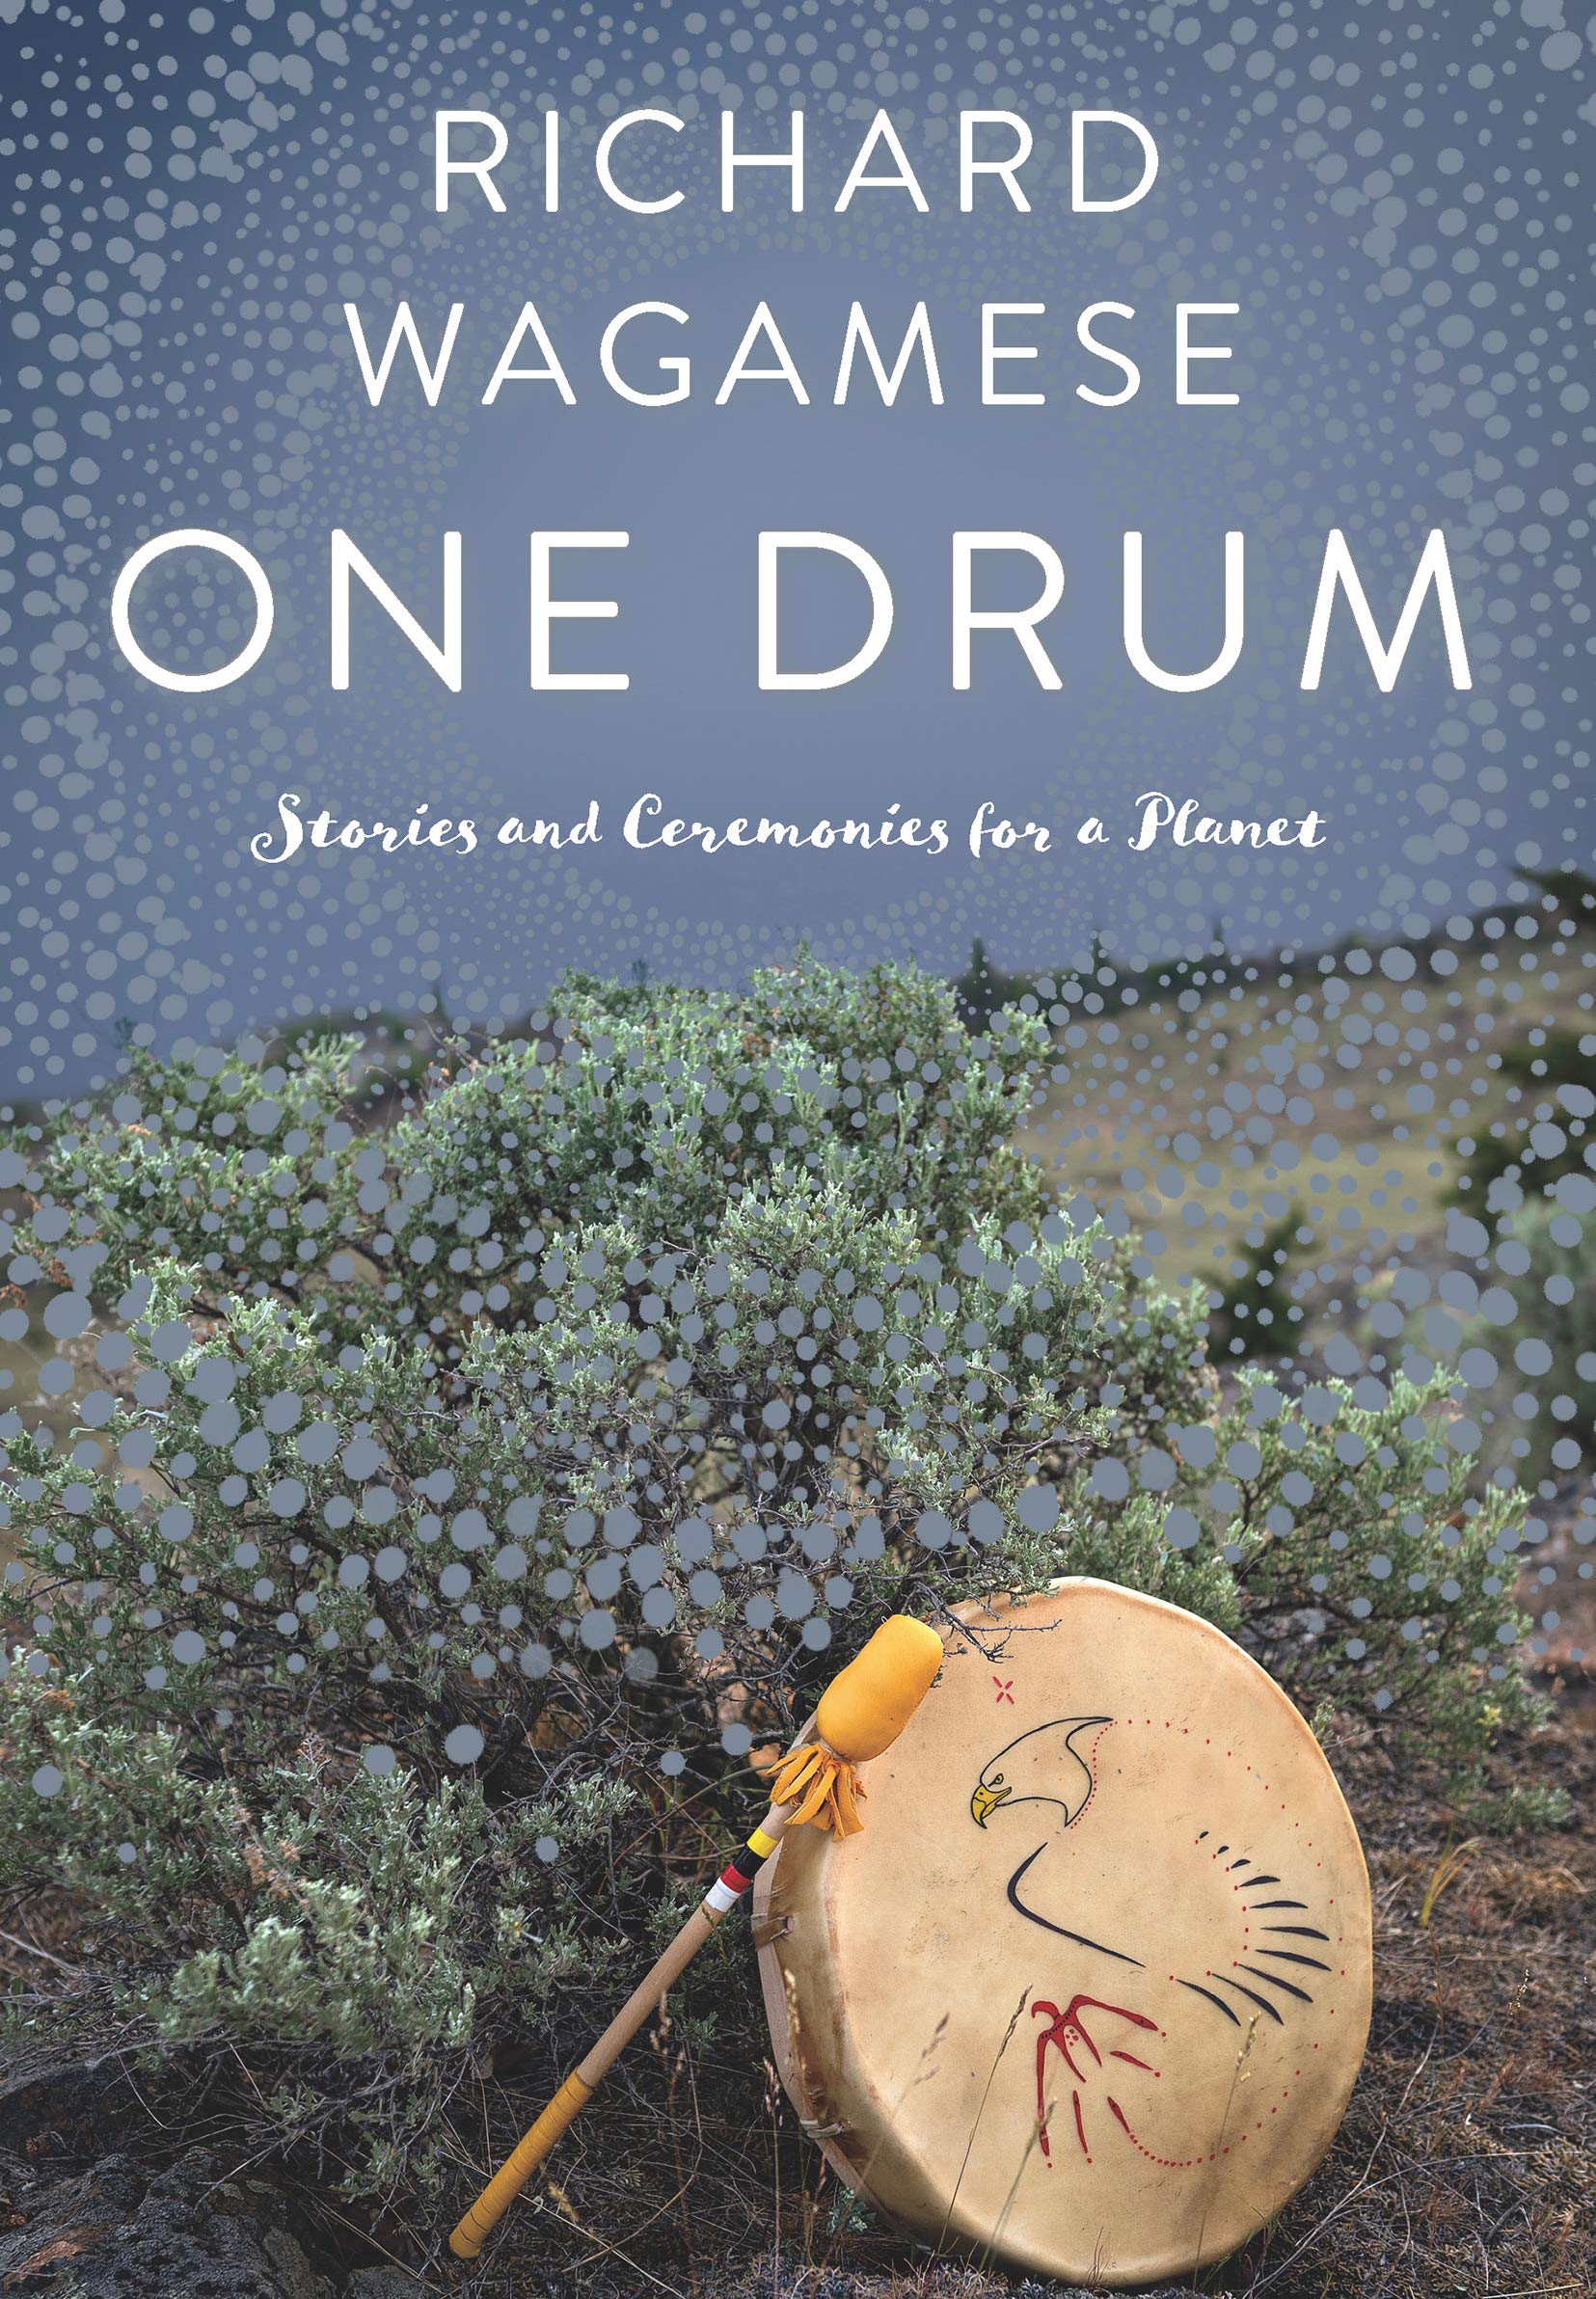 One Drum: Stories and Ceremonies for a Planet